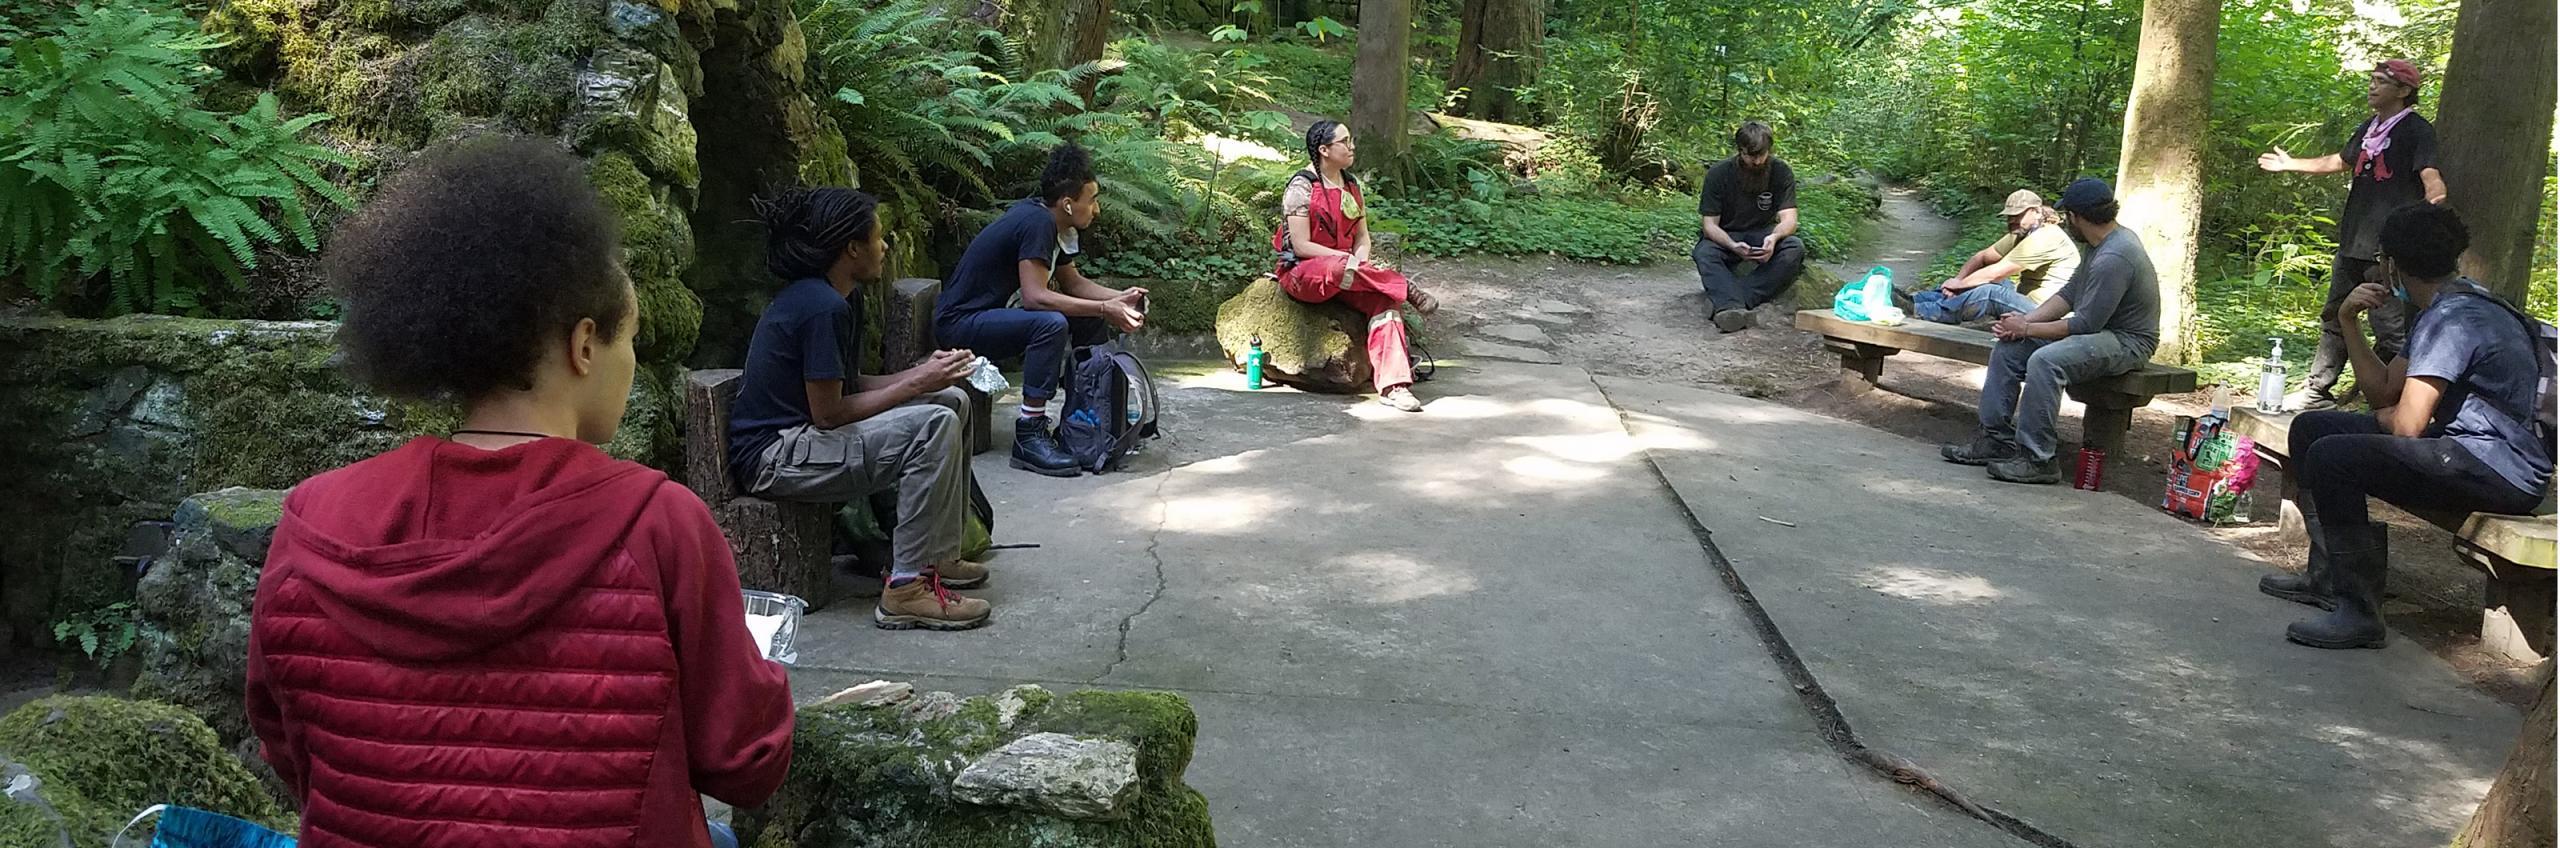 Young adults sit six feet apart. They are looking at a man standing and speaking. They are surrounded by ferns, trees, and dappled sunshine.